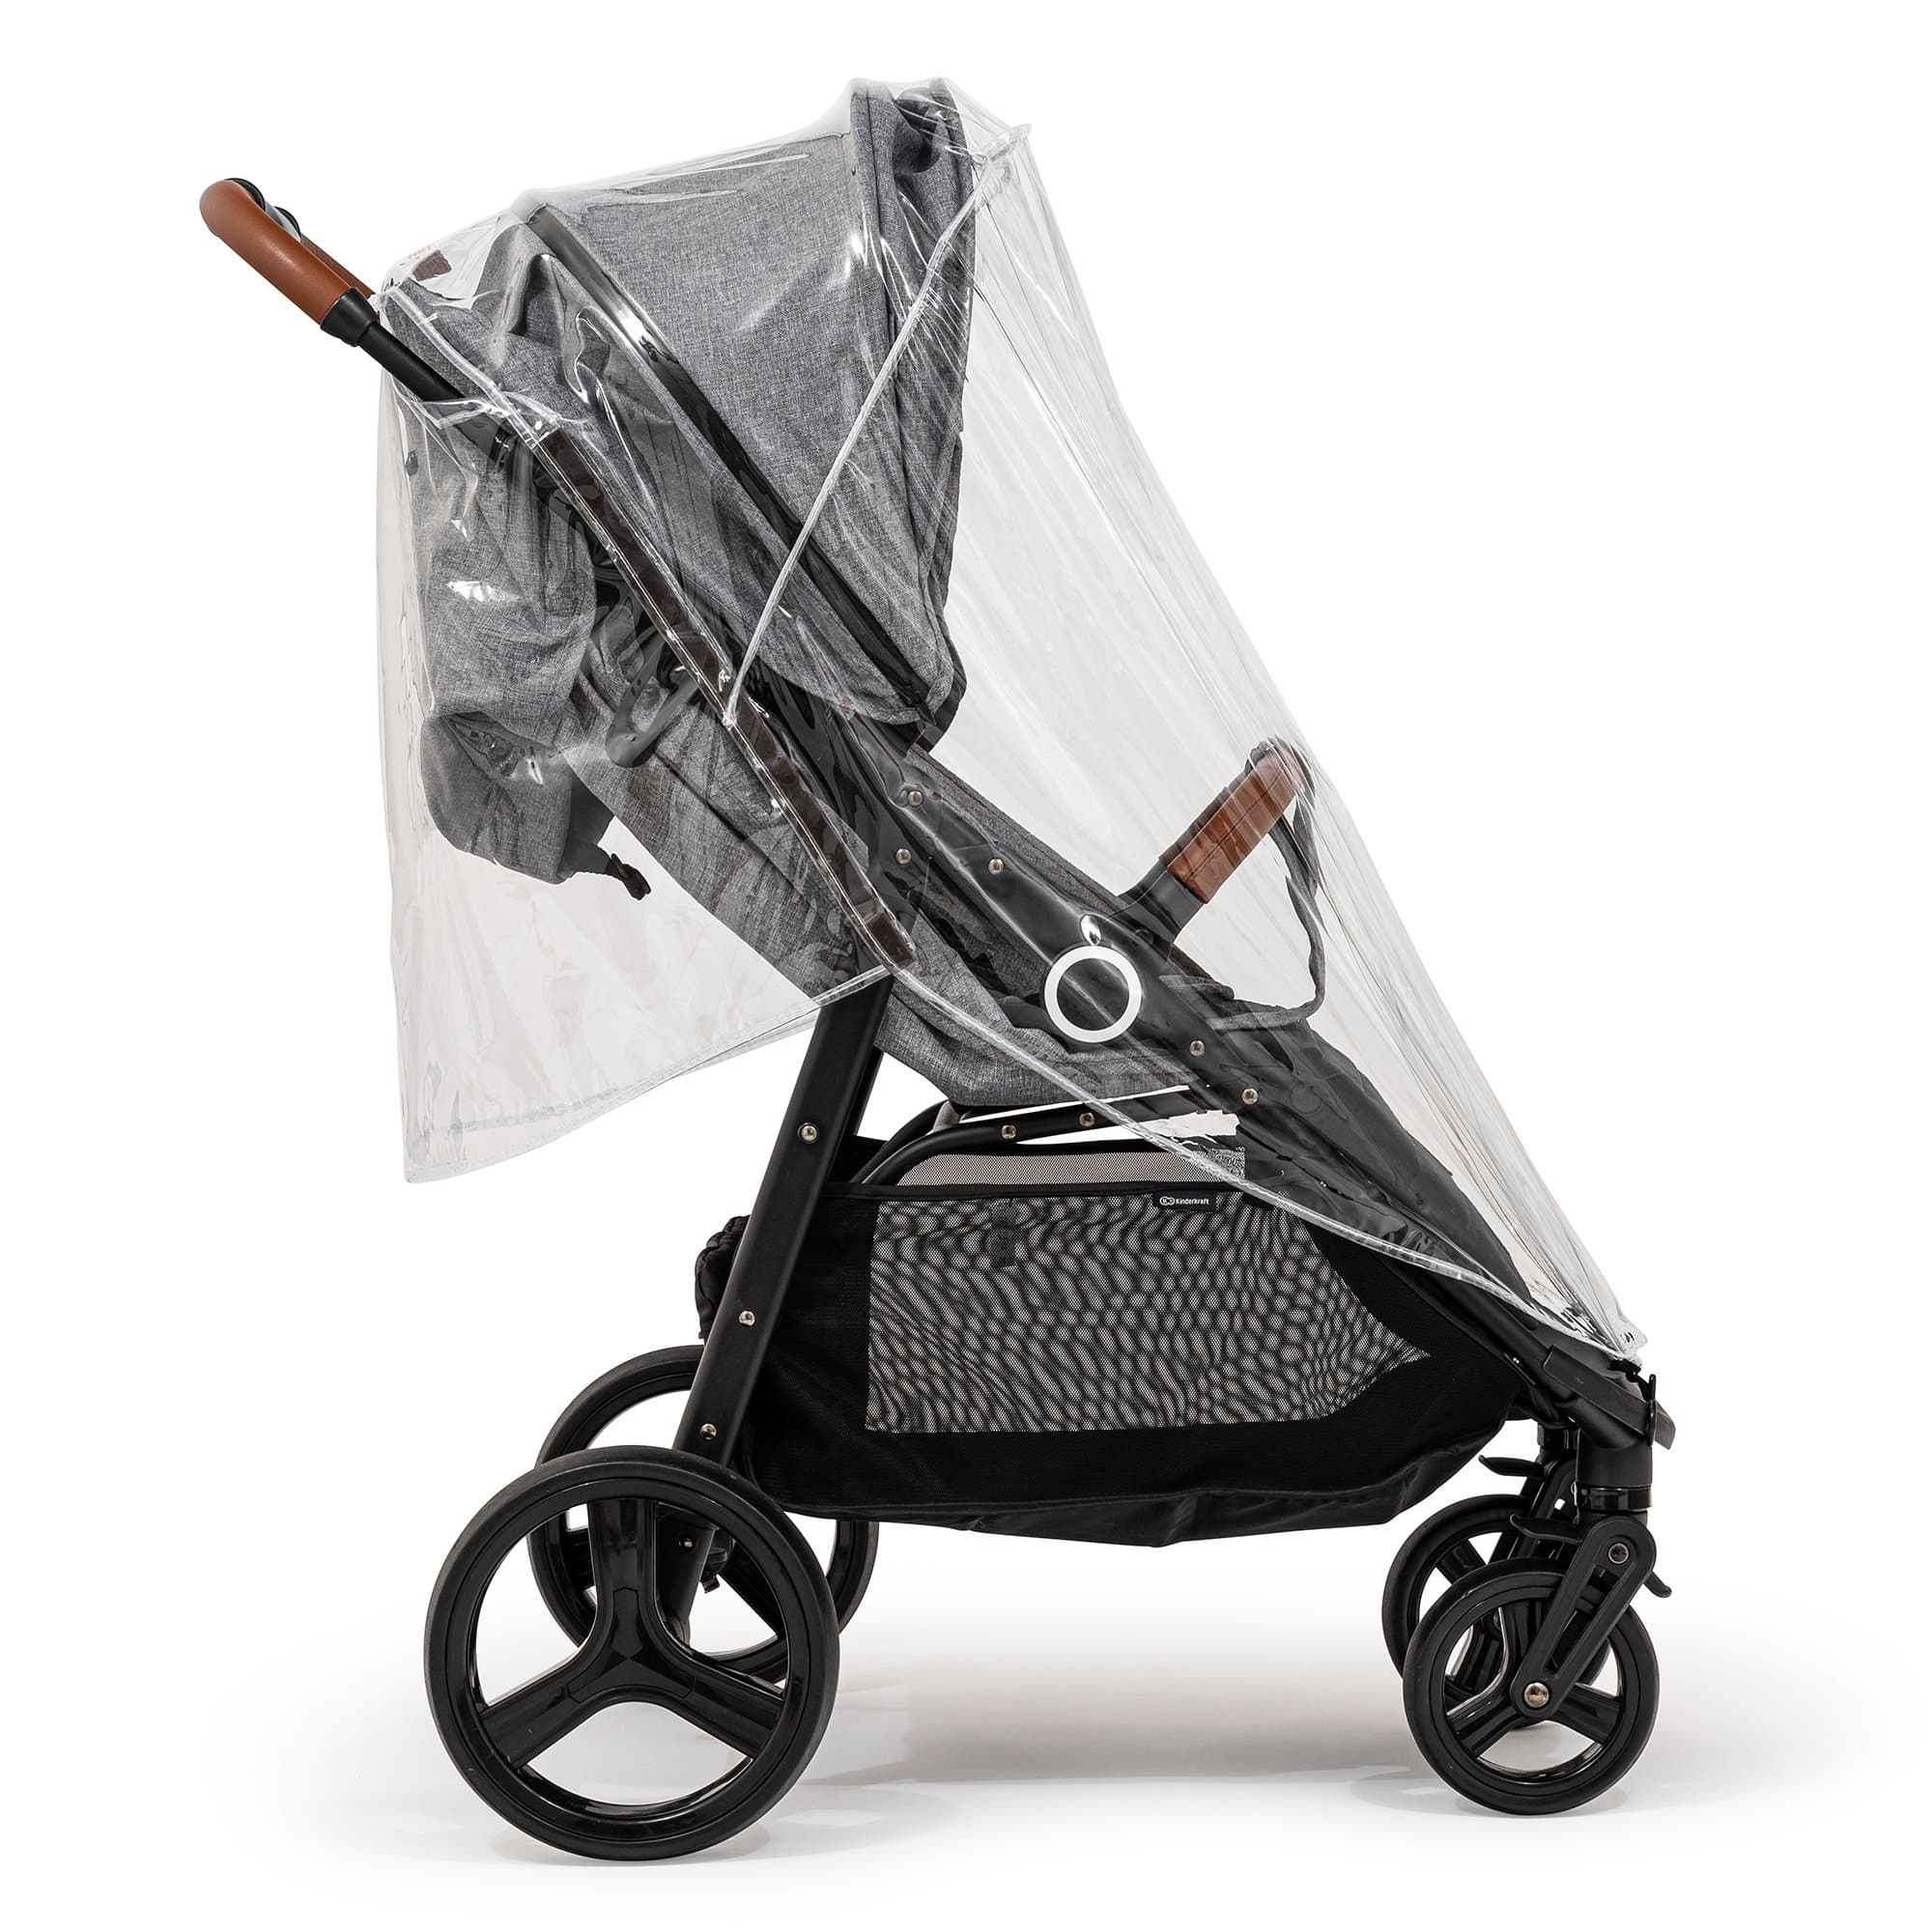 Universal Rain Cover For Buggys - Fits All Models -  | For Your Little One